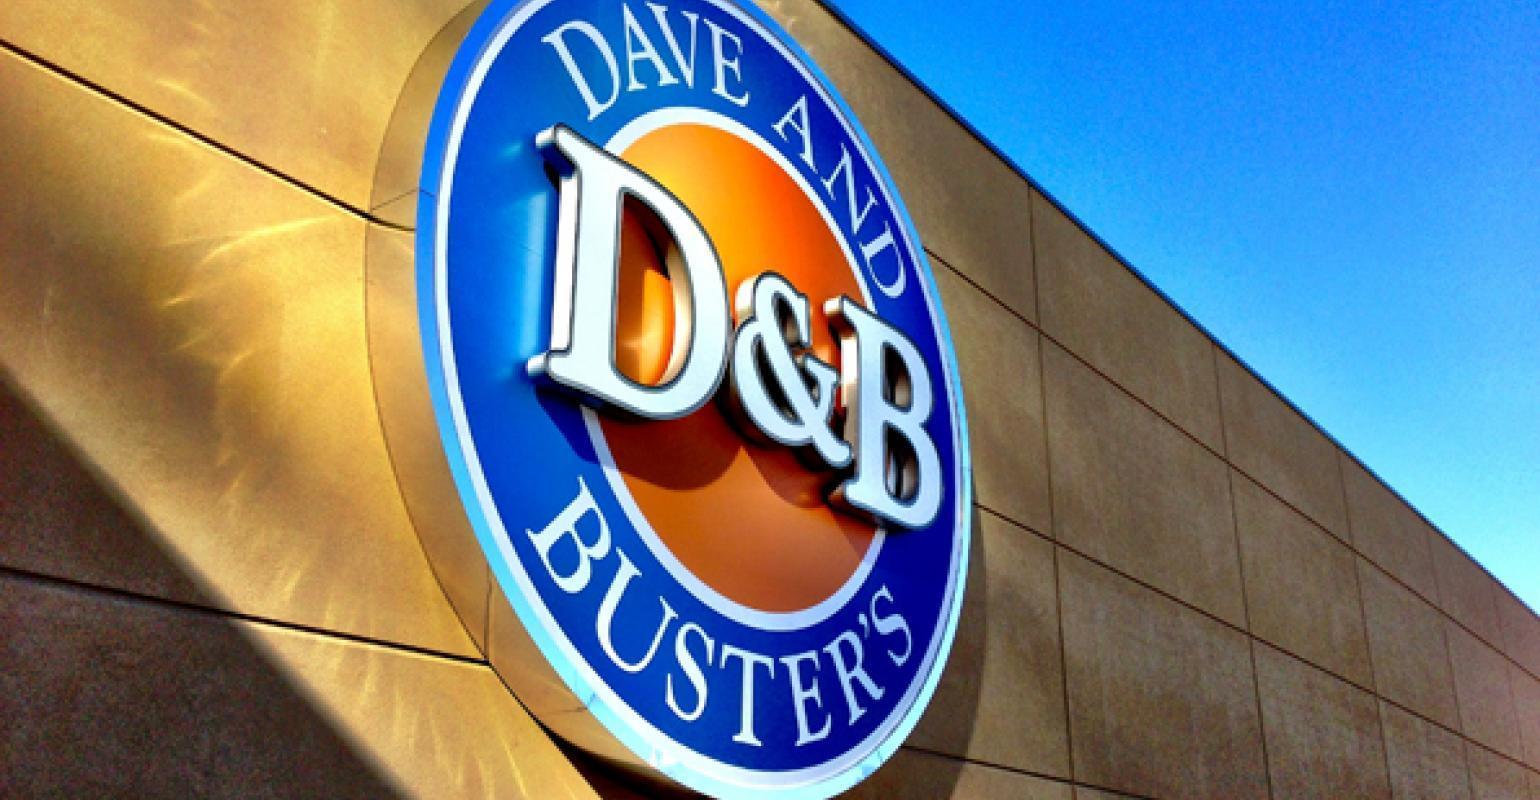 Dave & Buster's traffic down as eatertainment struggles